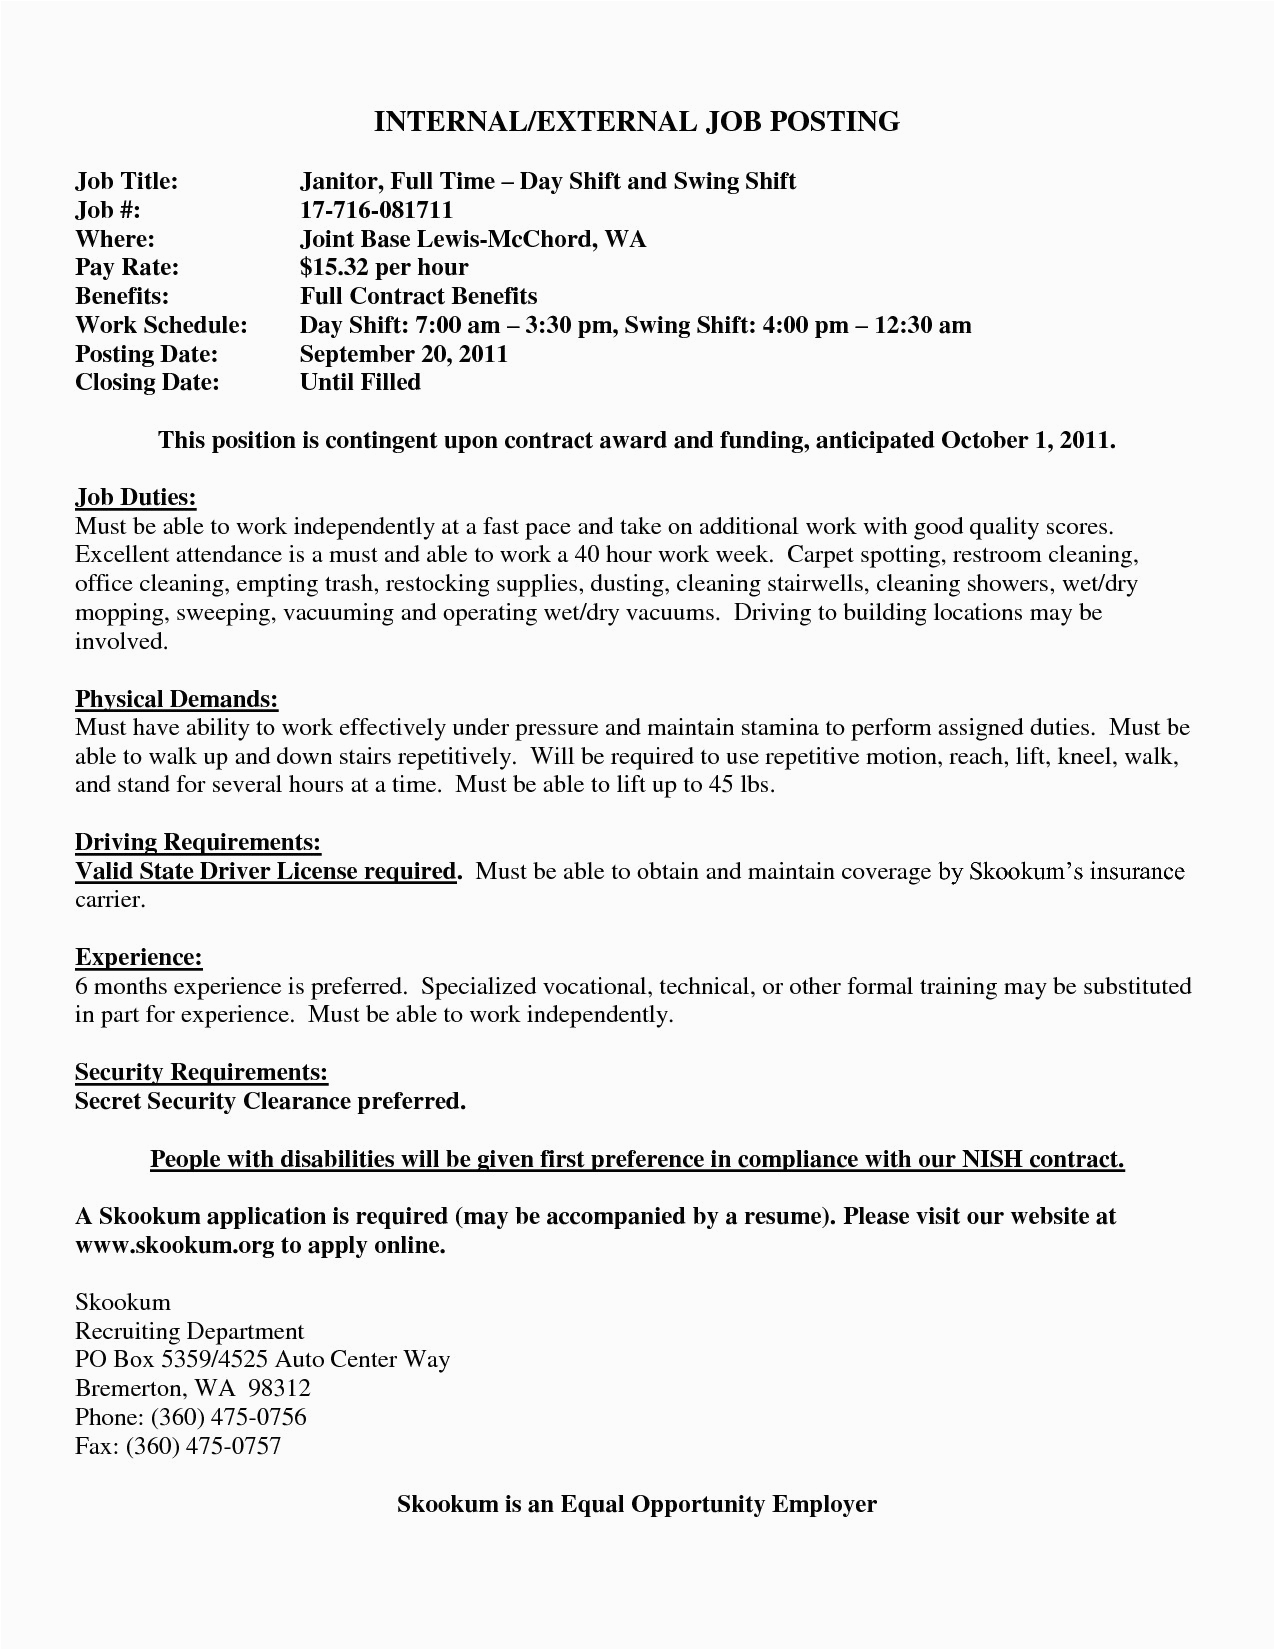 resume format 6 months experience